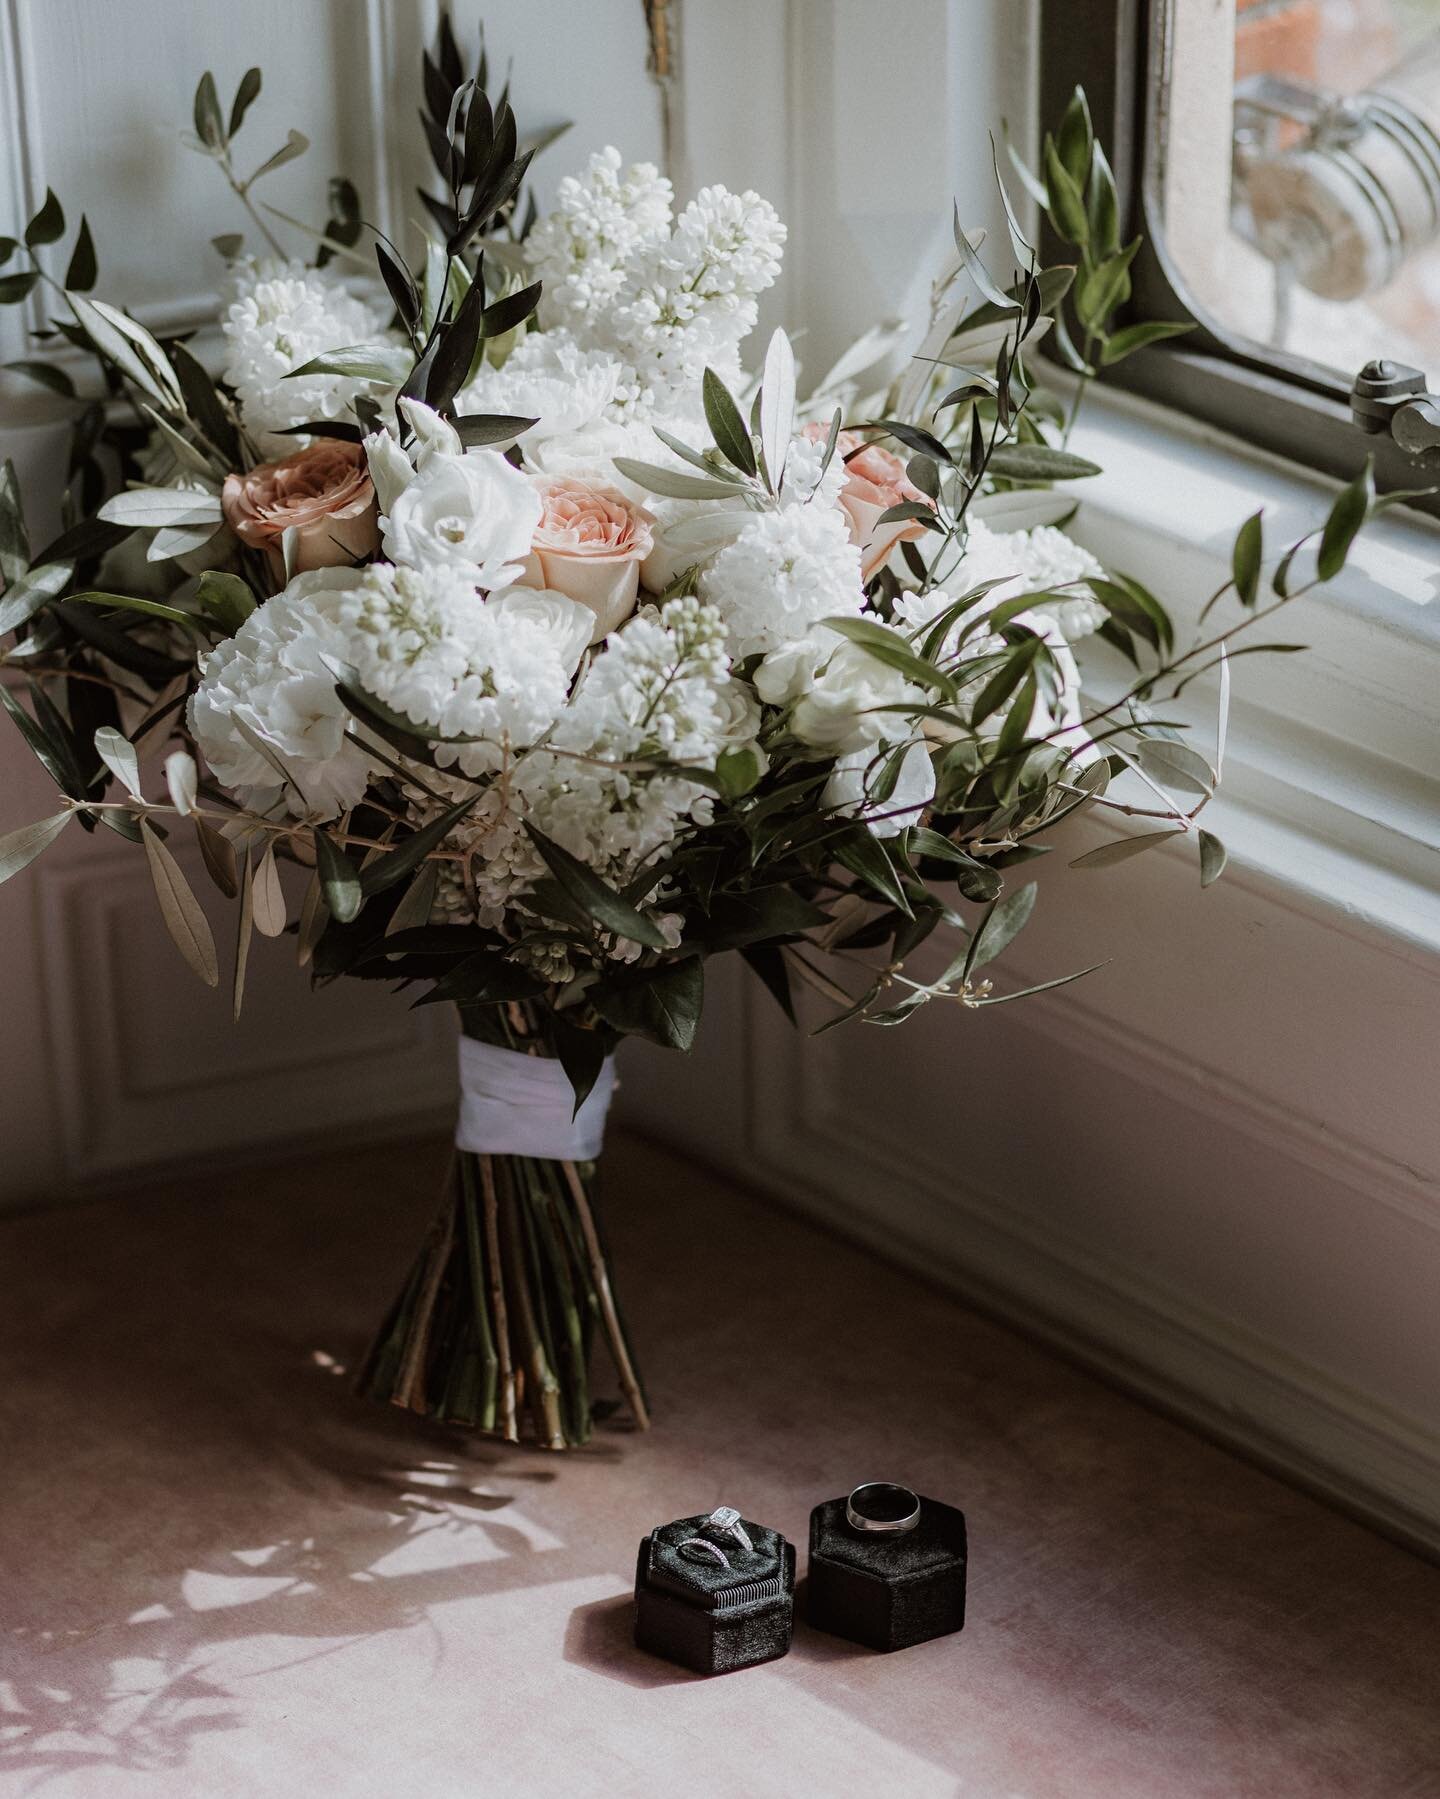 Never underestimate the power of beautiful florals for your wedding. Flowers can completely define the vibe you are going for and here is a beautiful example of a stunning bouquet from @stagcottageflowers - dramatic, elegant and chic 🖤 They also pro